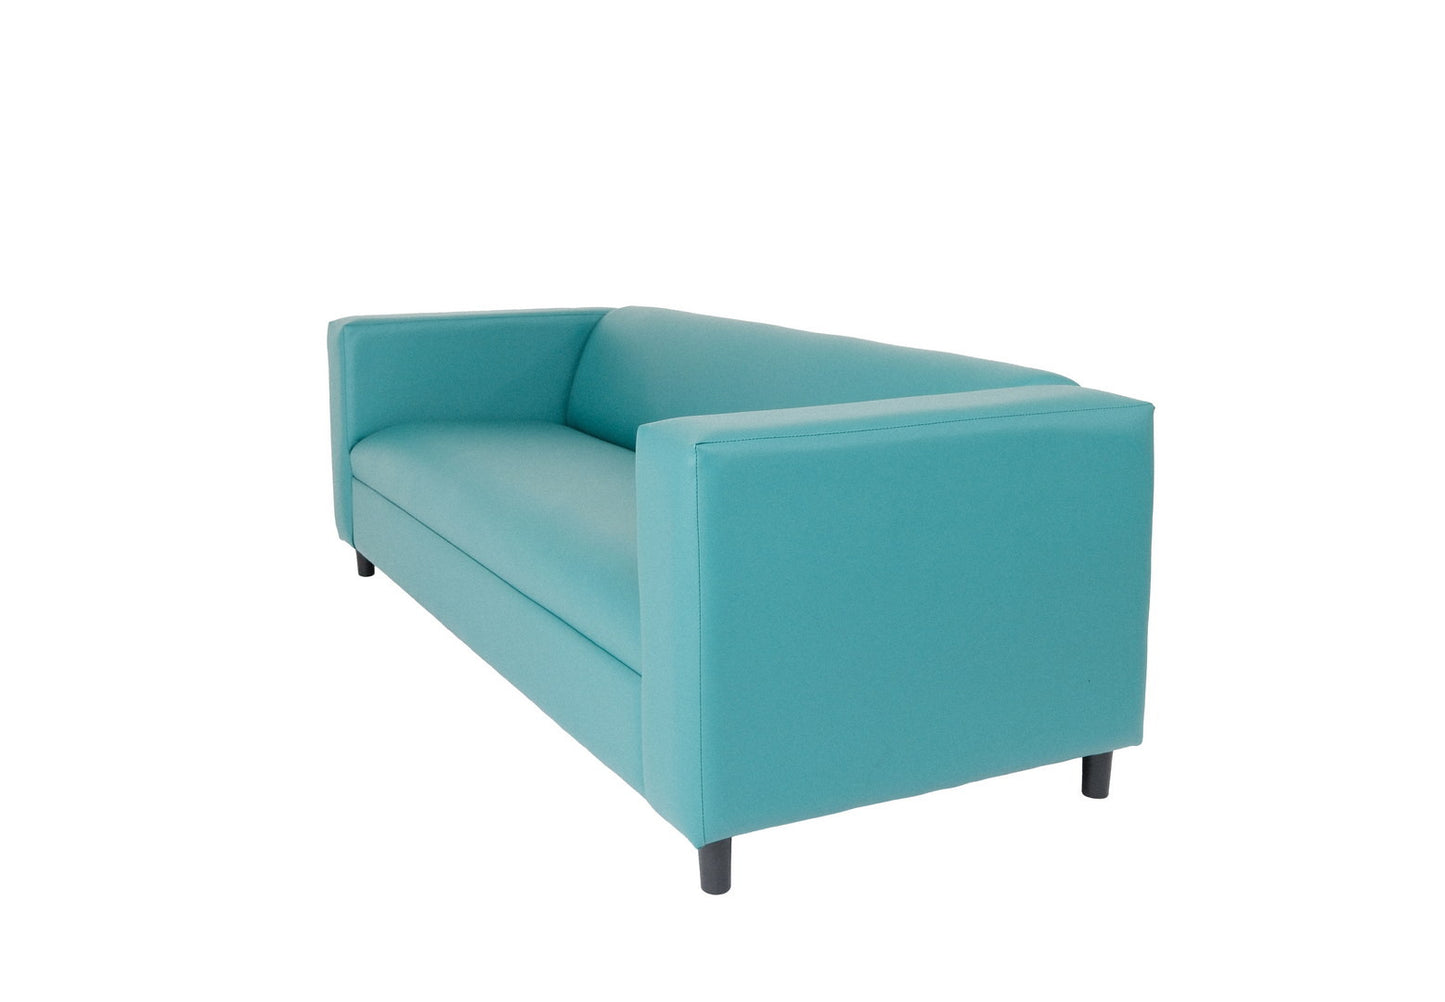 84" Blue Faux Leather Sofa With Black Legs